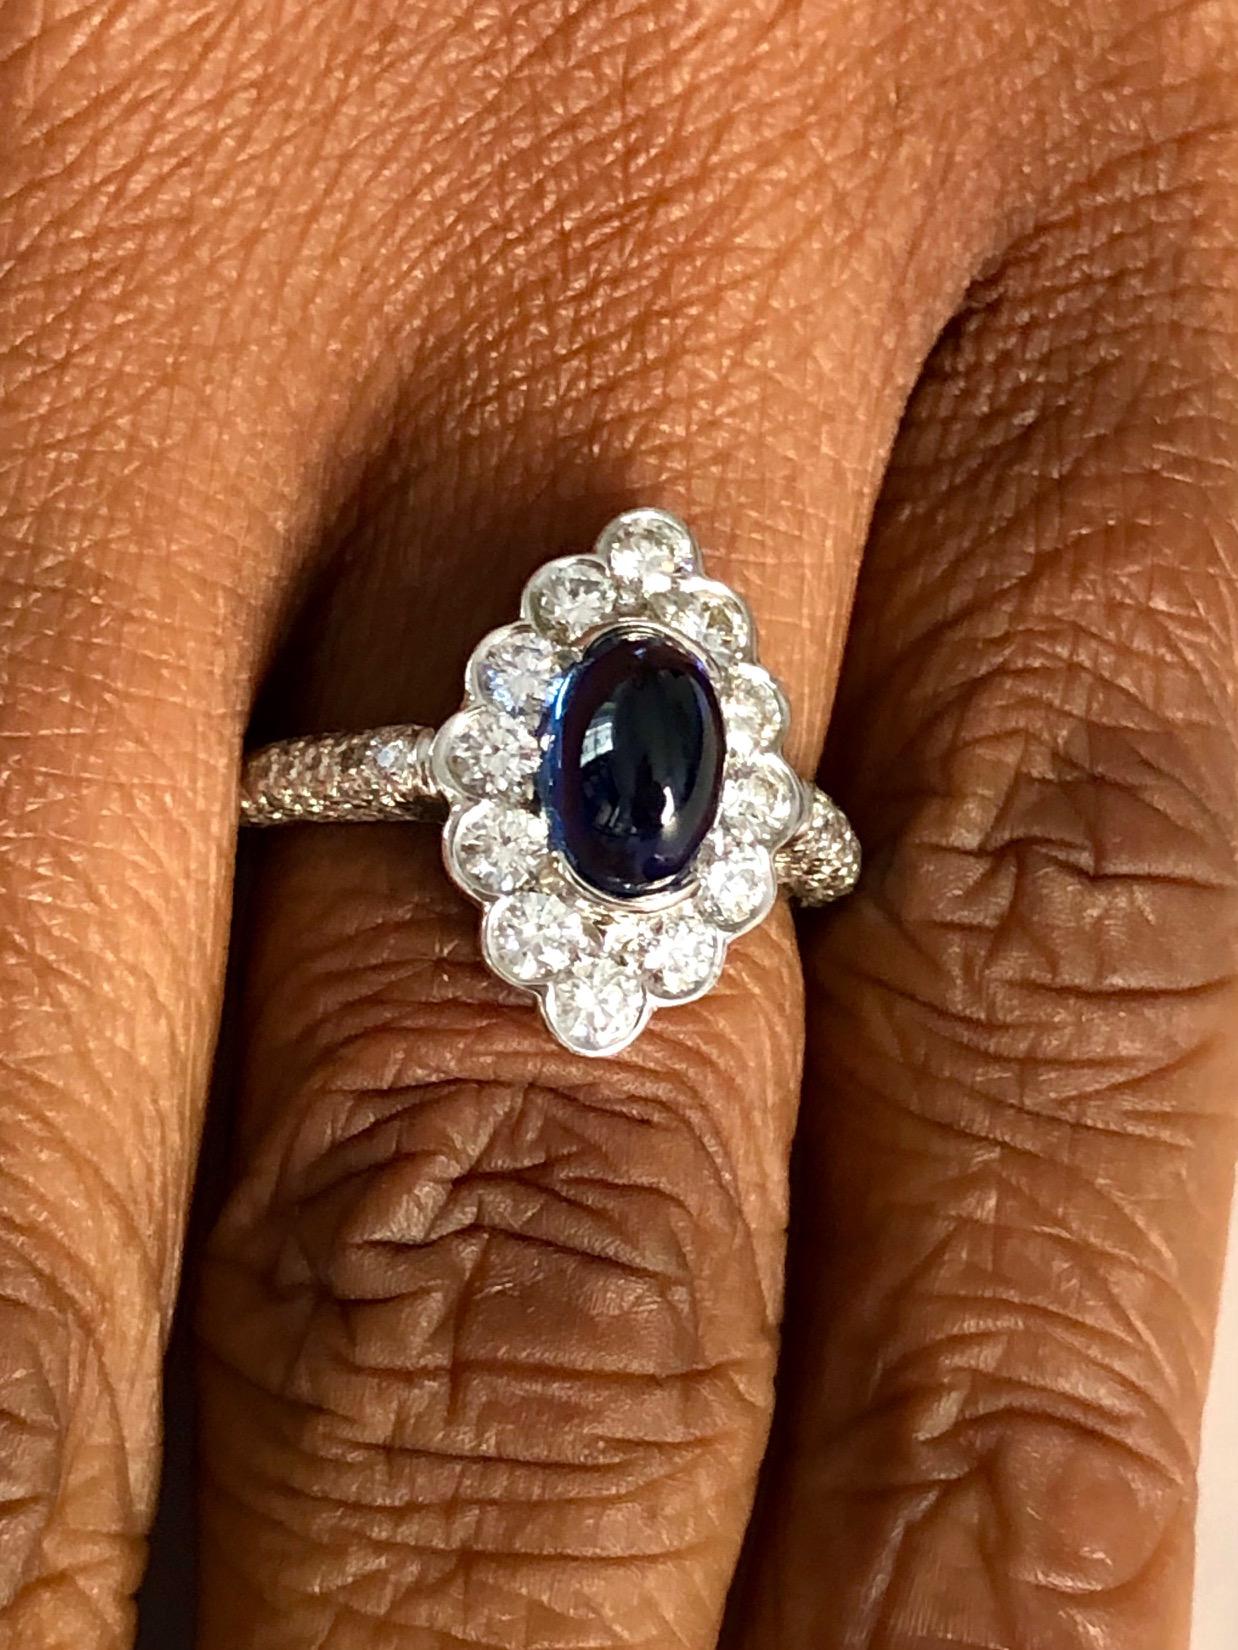 Marquise shape Ring made in Platinum, set with 96 diamonds 1.10 carats and a Cabochon Sapphire 2.41 carats.

We design and manufacture our jewelry in our workshop, located in New York City's diamond district.